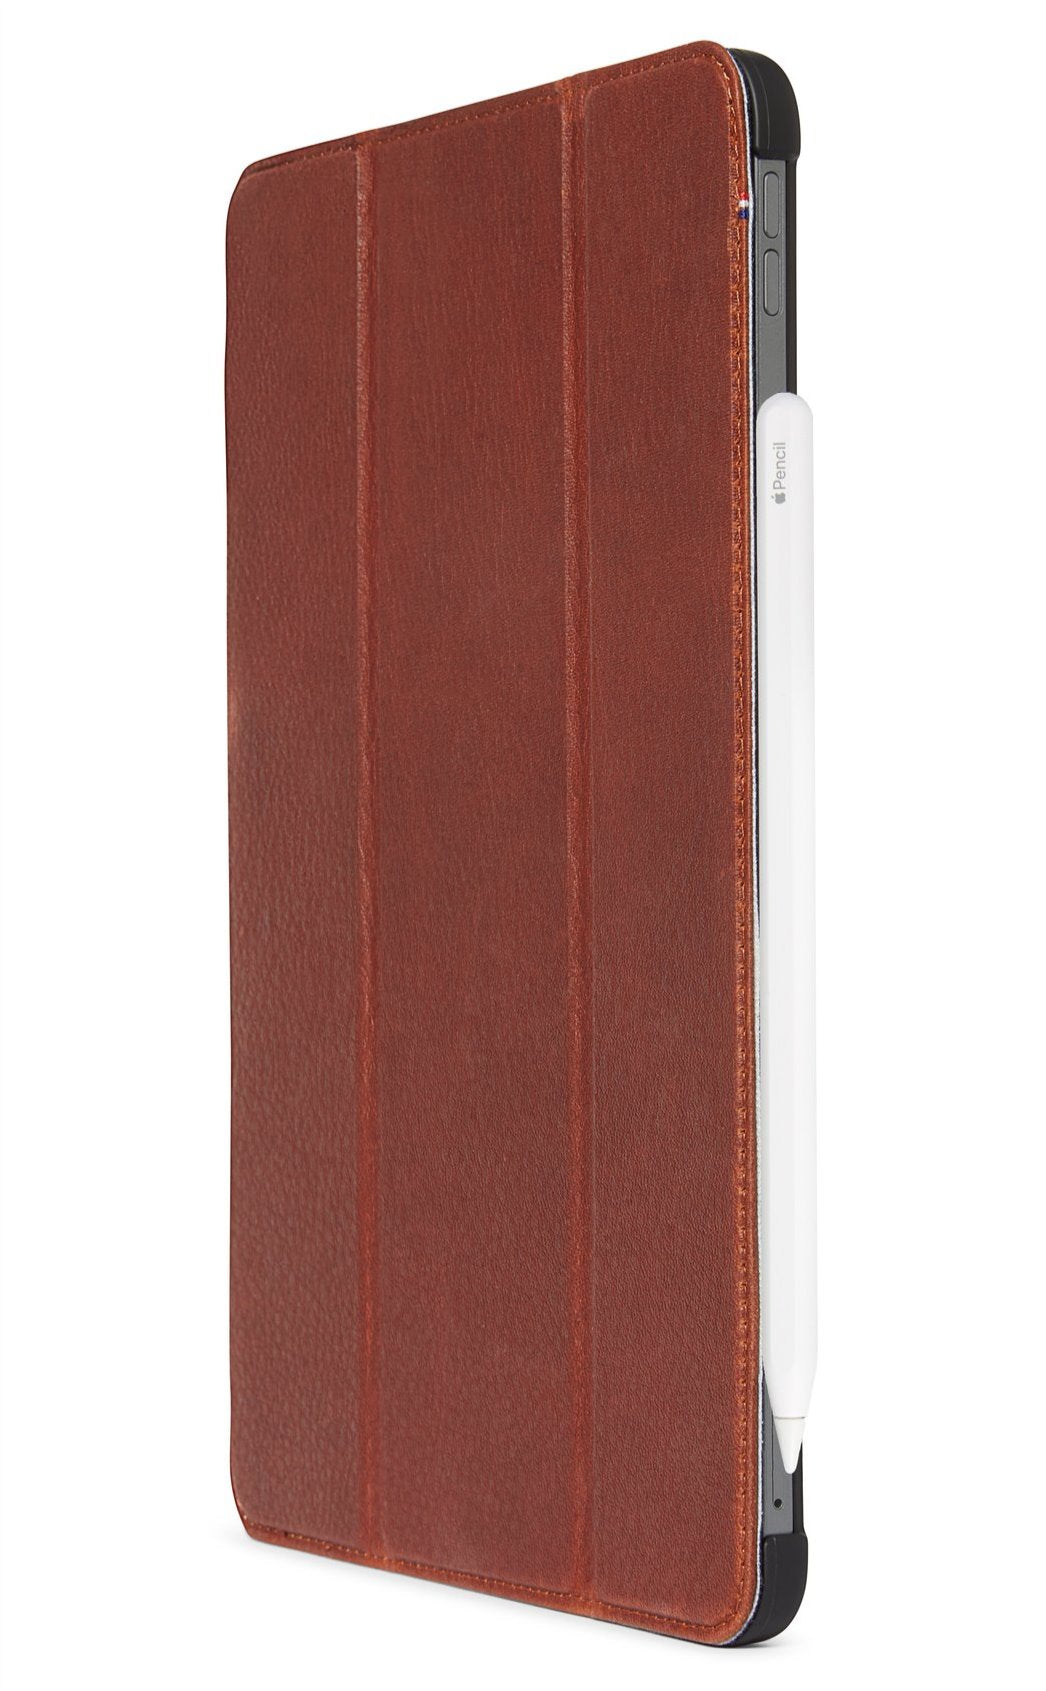 Leather Slim Cover iPad Air 10.9 4th Gen (2020) Brown